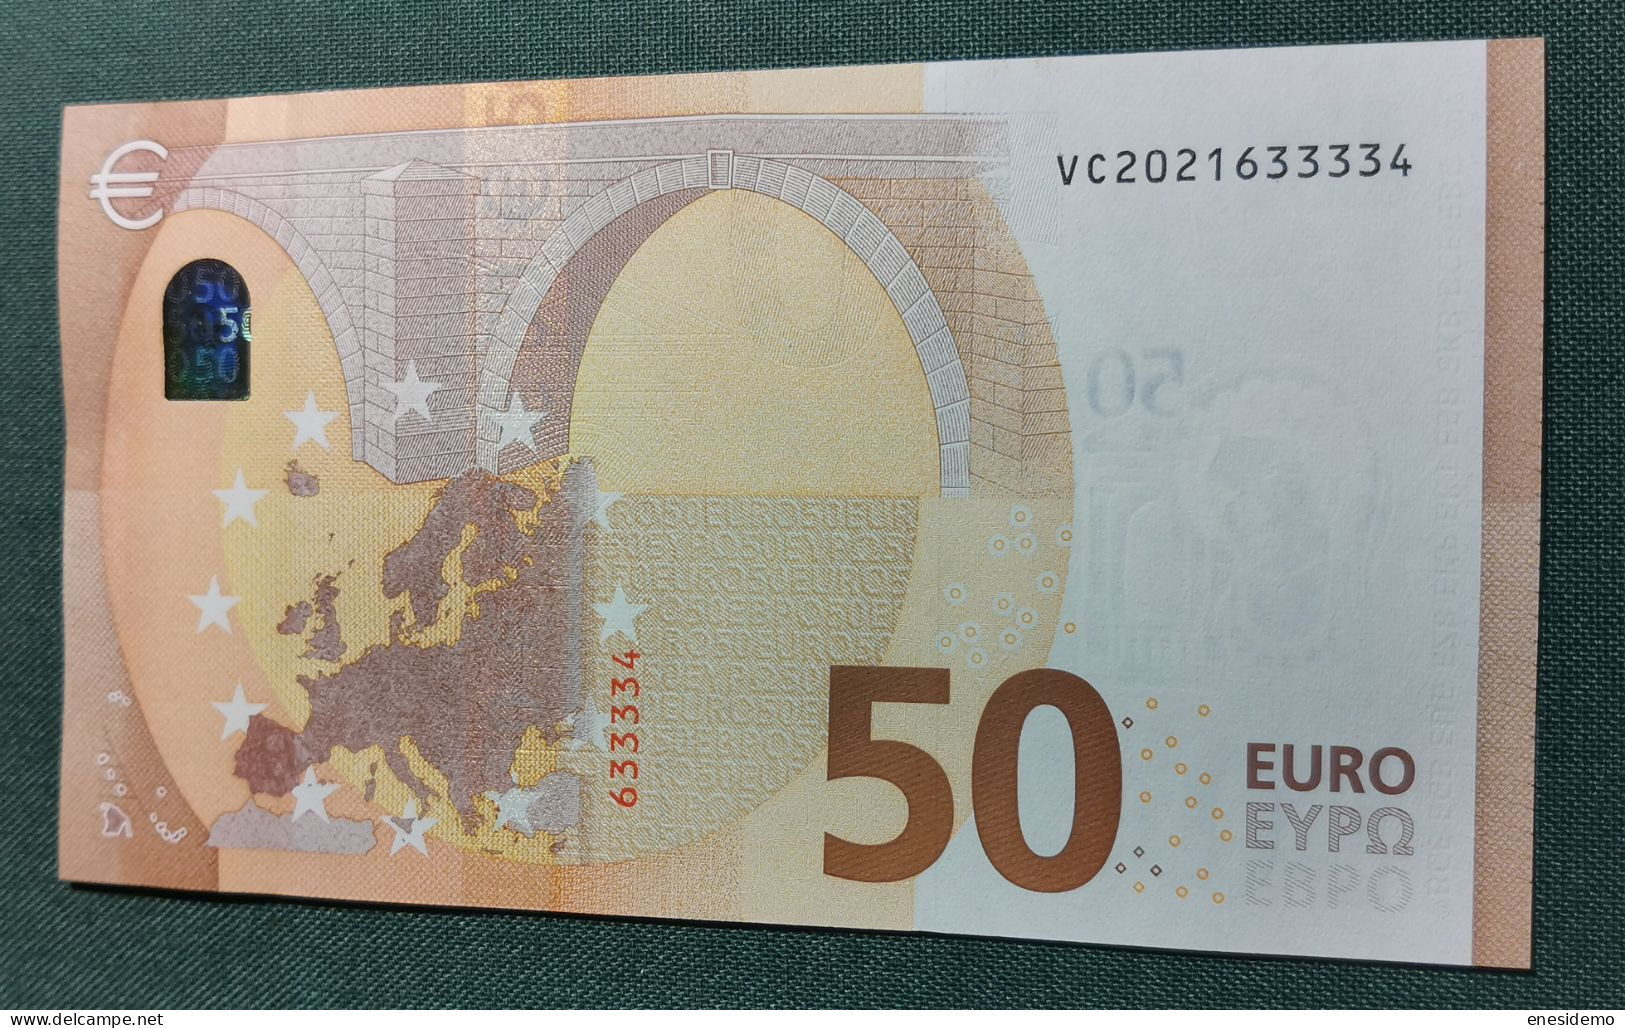 50 EURO SPAIN 2017 LAGARDE V021E4 VC UNC. SC FDS NICE NUMBER